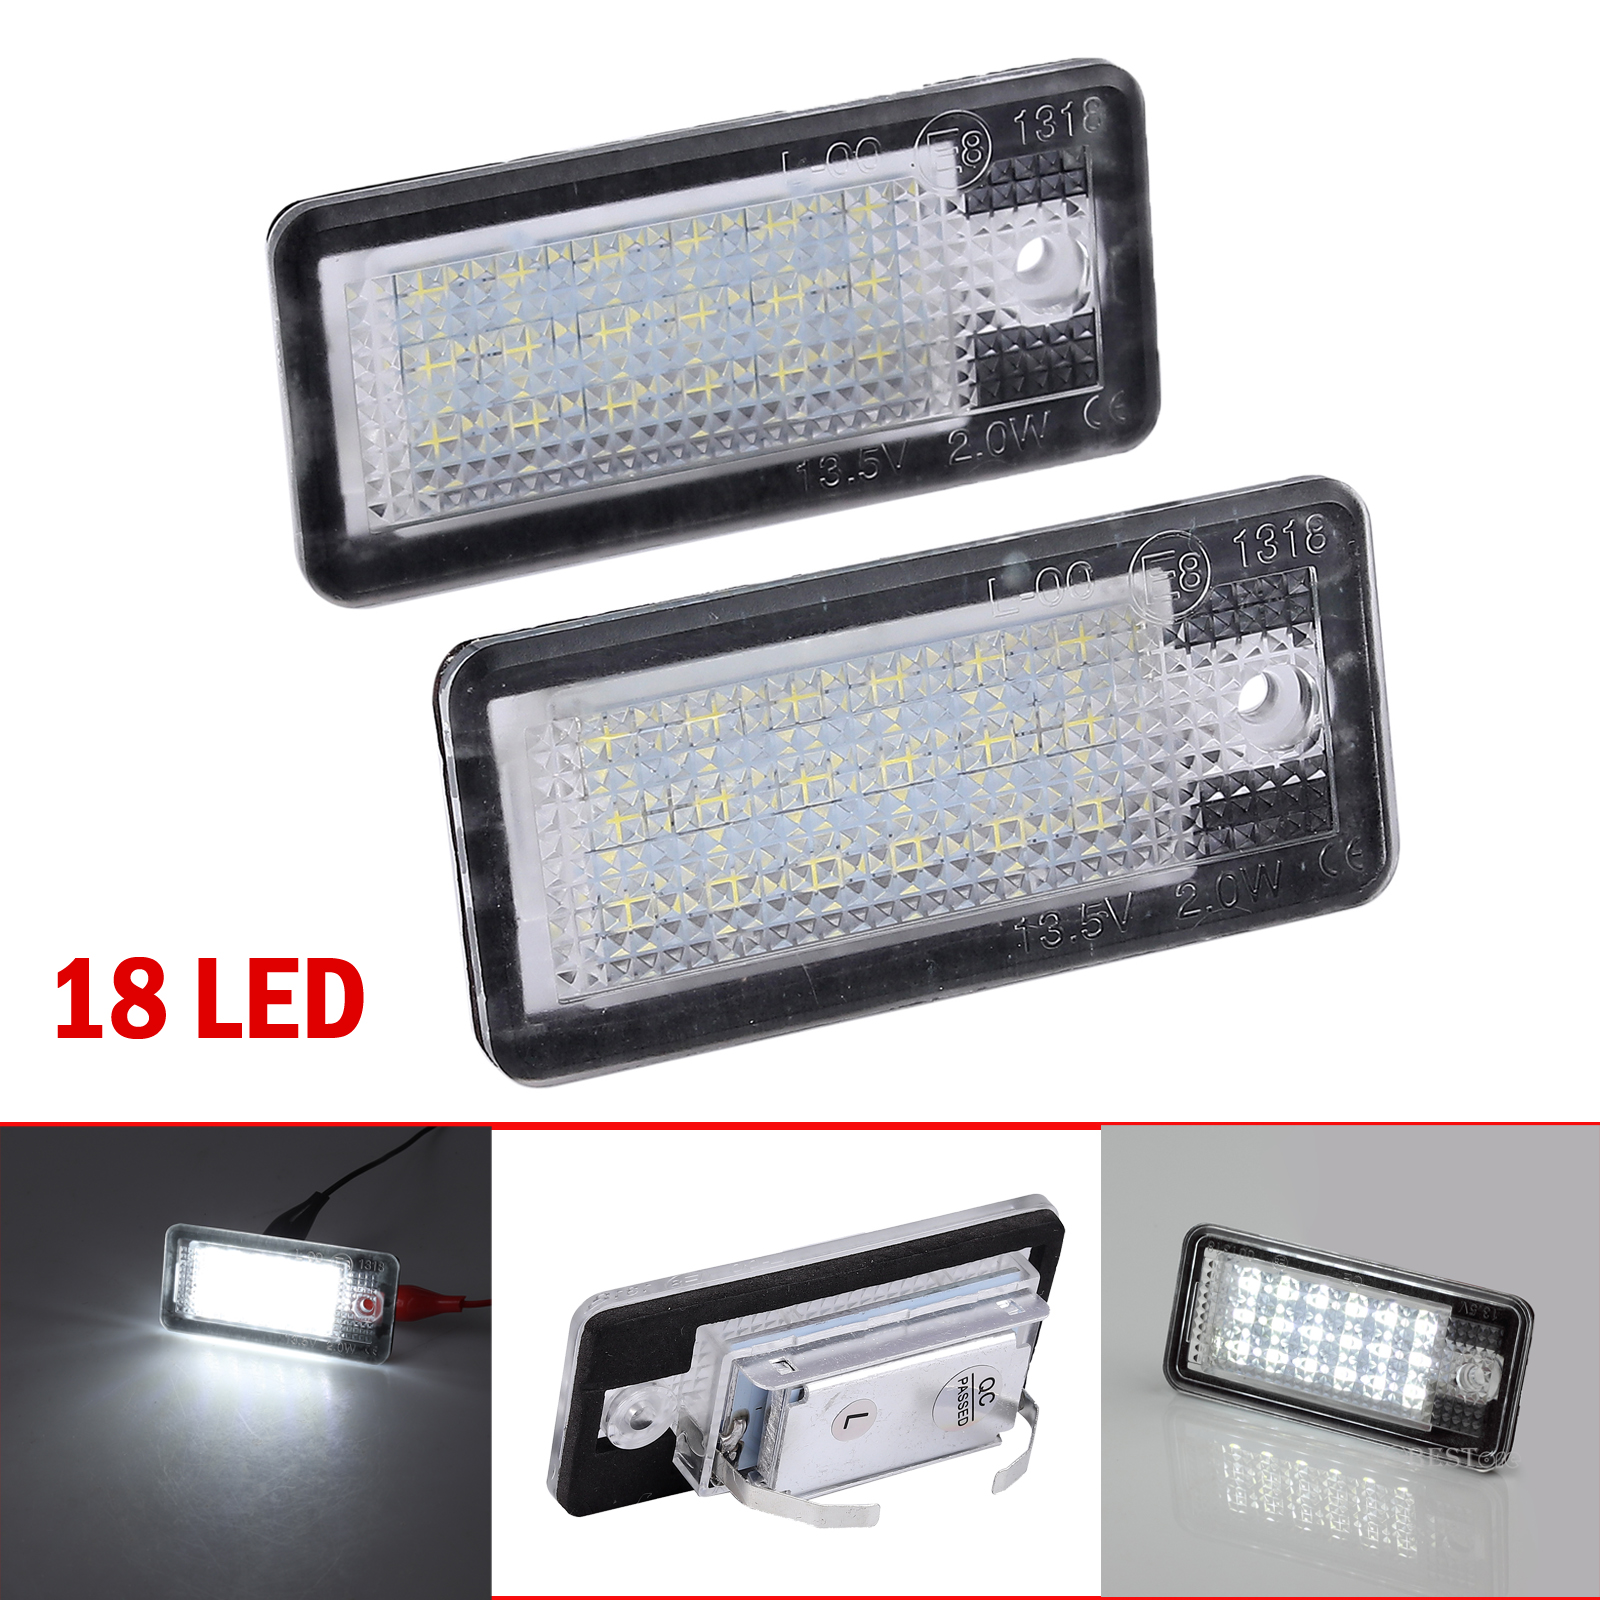 CANBUS Error Free LED License Plate Light For Audi A3 A4 S3 S4 A6 S6 Q7 A8 RS4 A